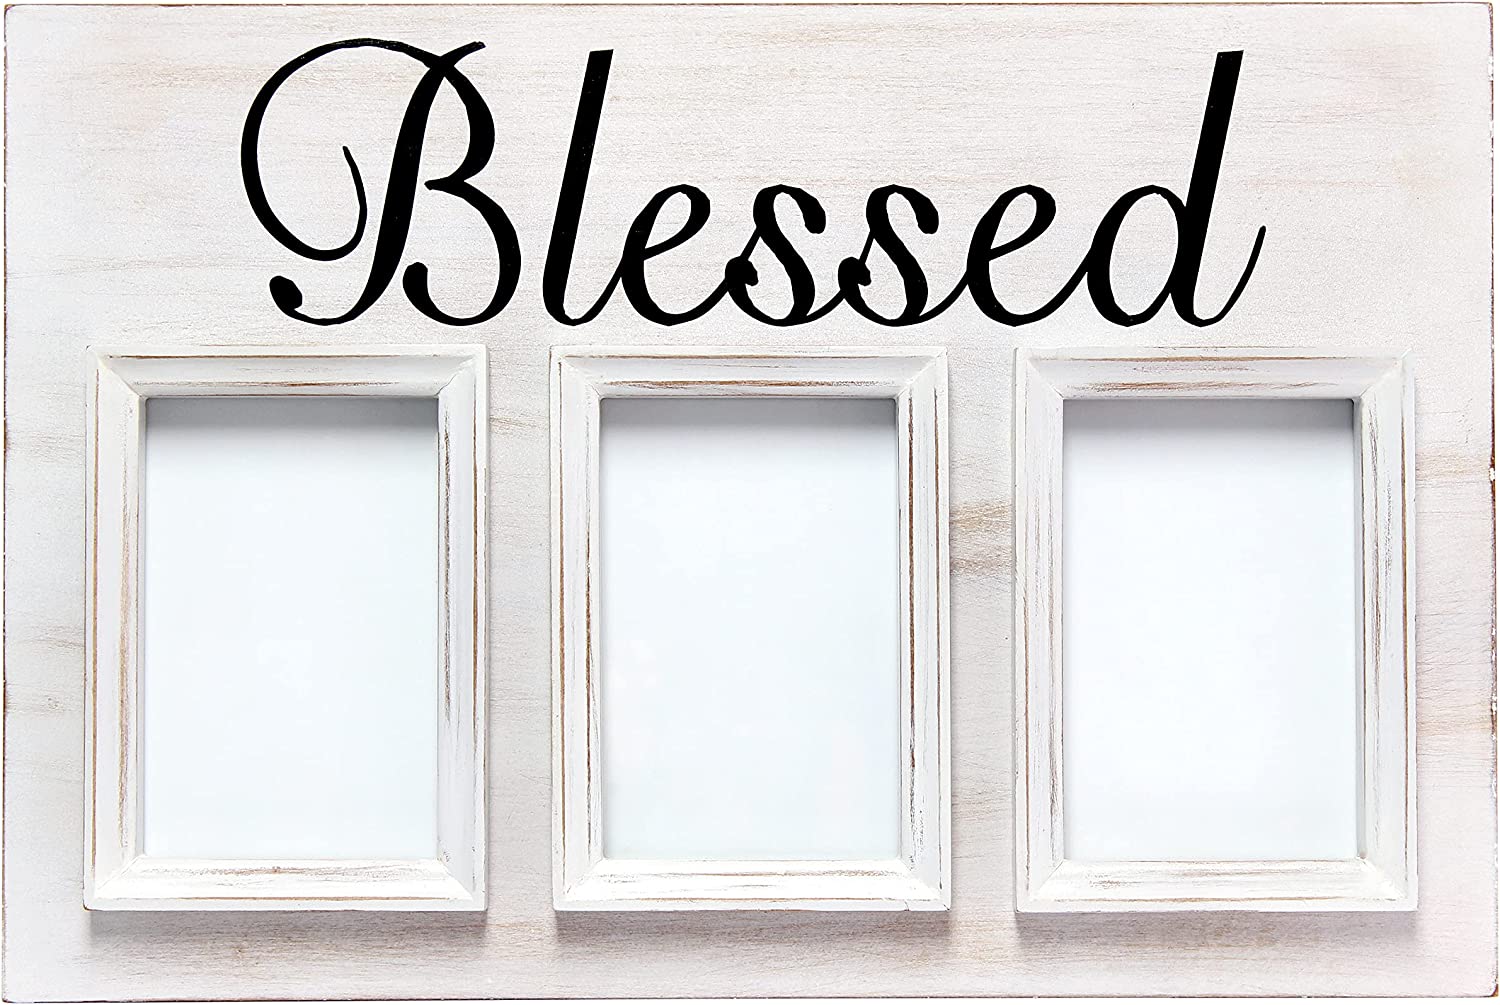 Elegant Designs HG2002-WBL Rustic Farmhouse 3 Photo Collage Wood 4x6 Picture Frame, White Wash "Blessed"